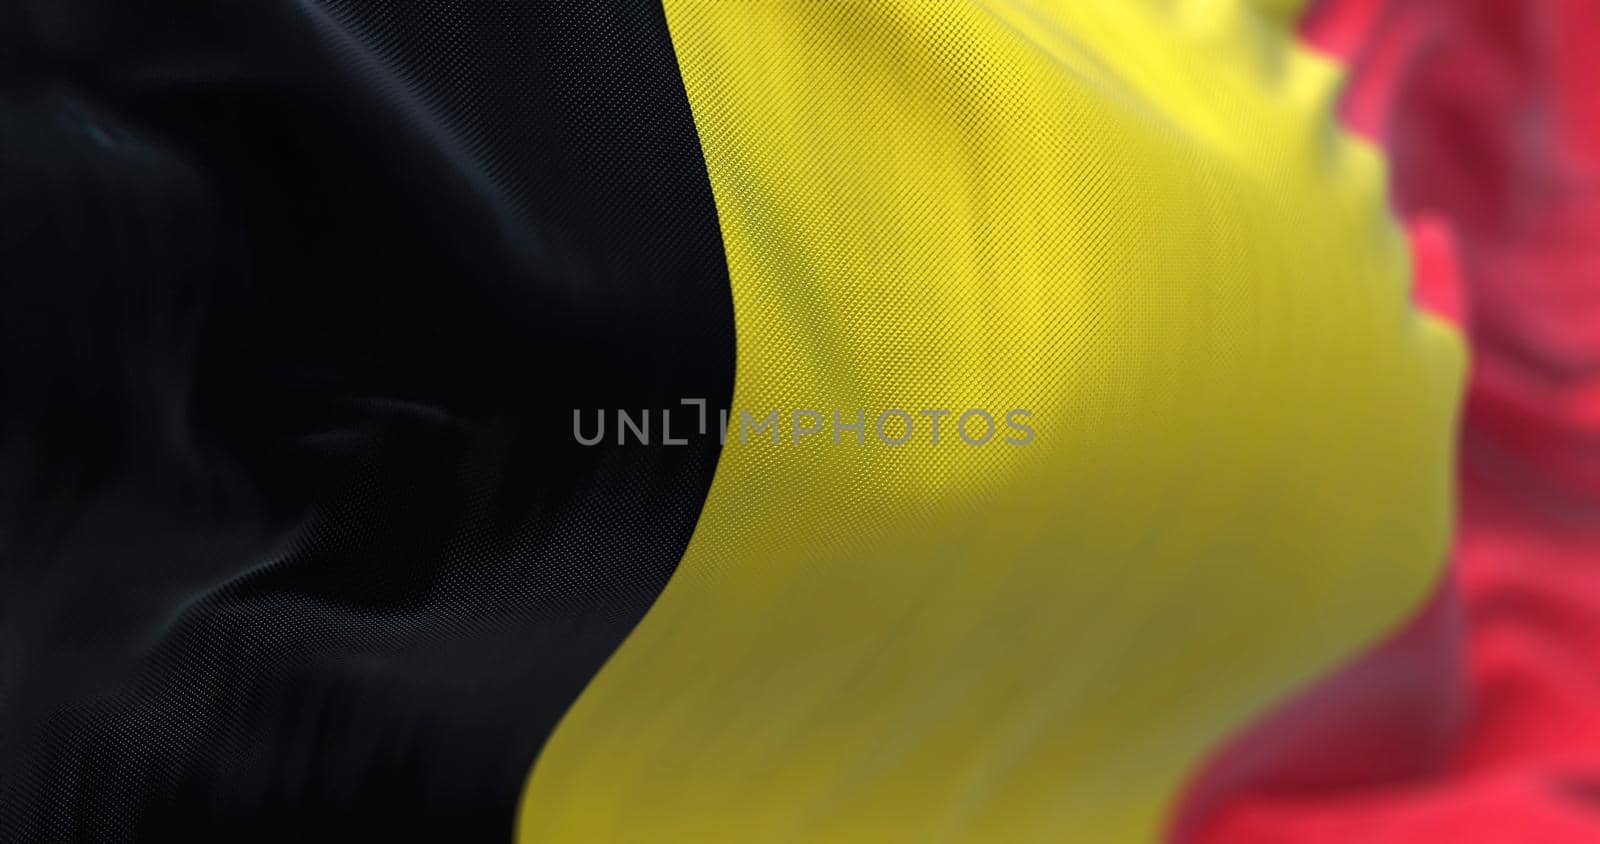 Close-up view of the belgian national flag waving in the wind. Belgium is a country in Northwestern Europe. Fabric textured background. Selective focus